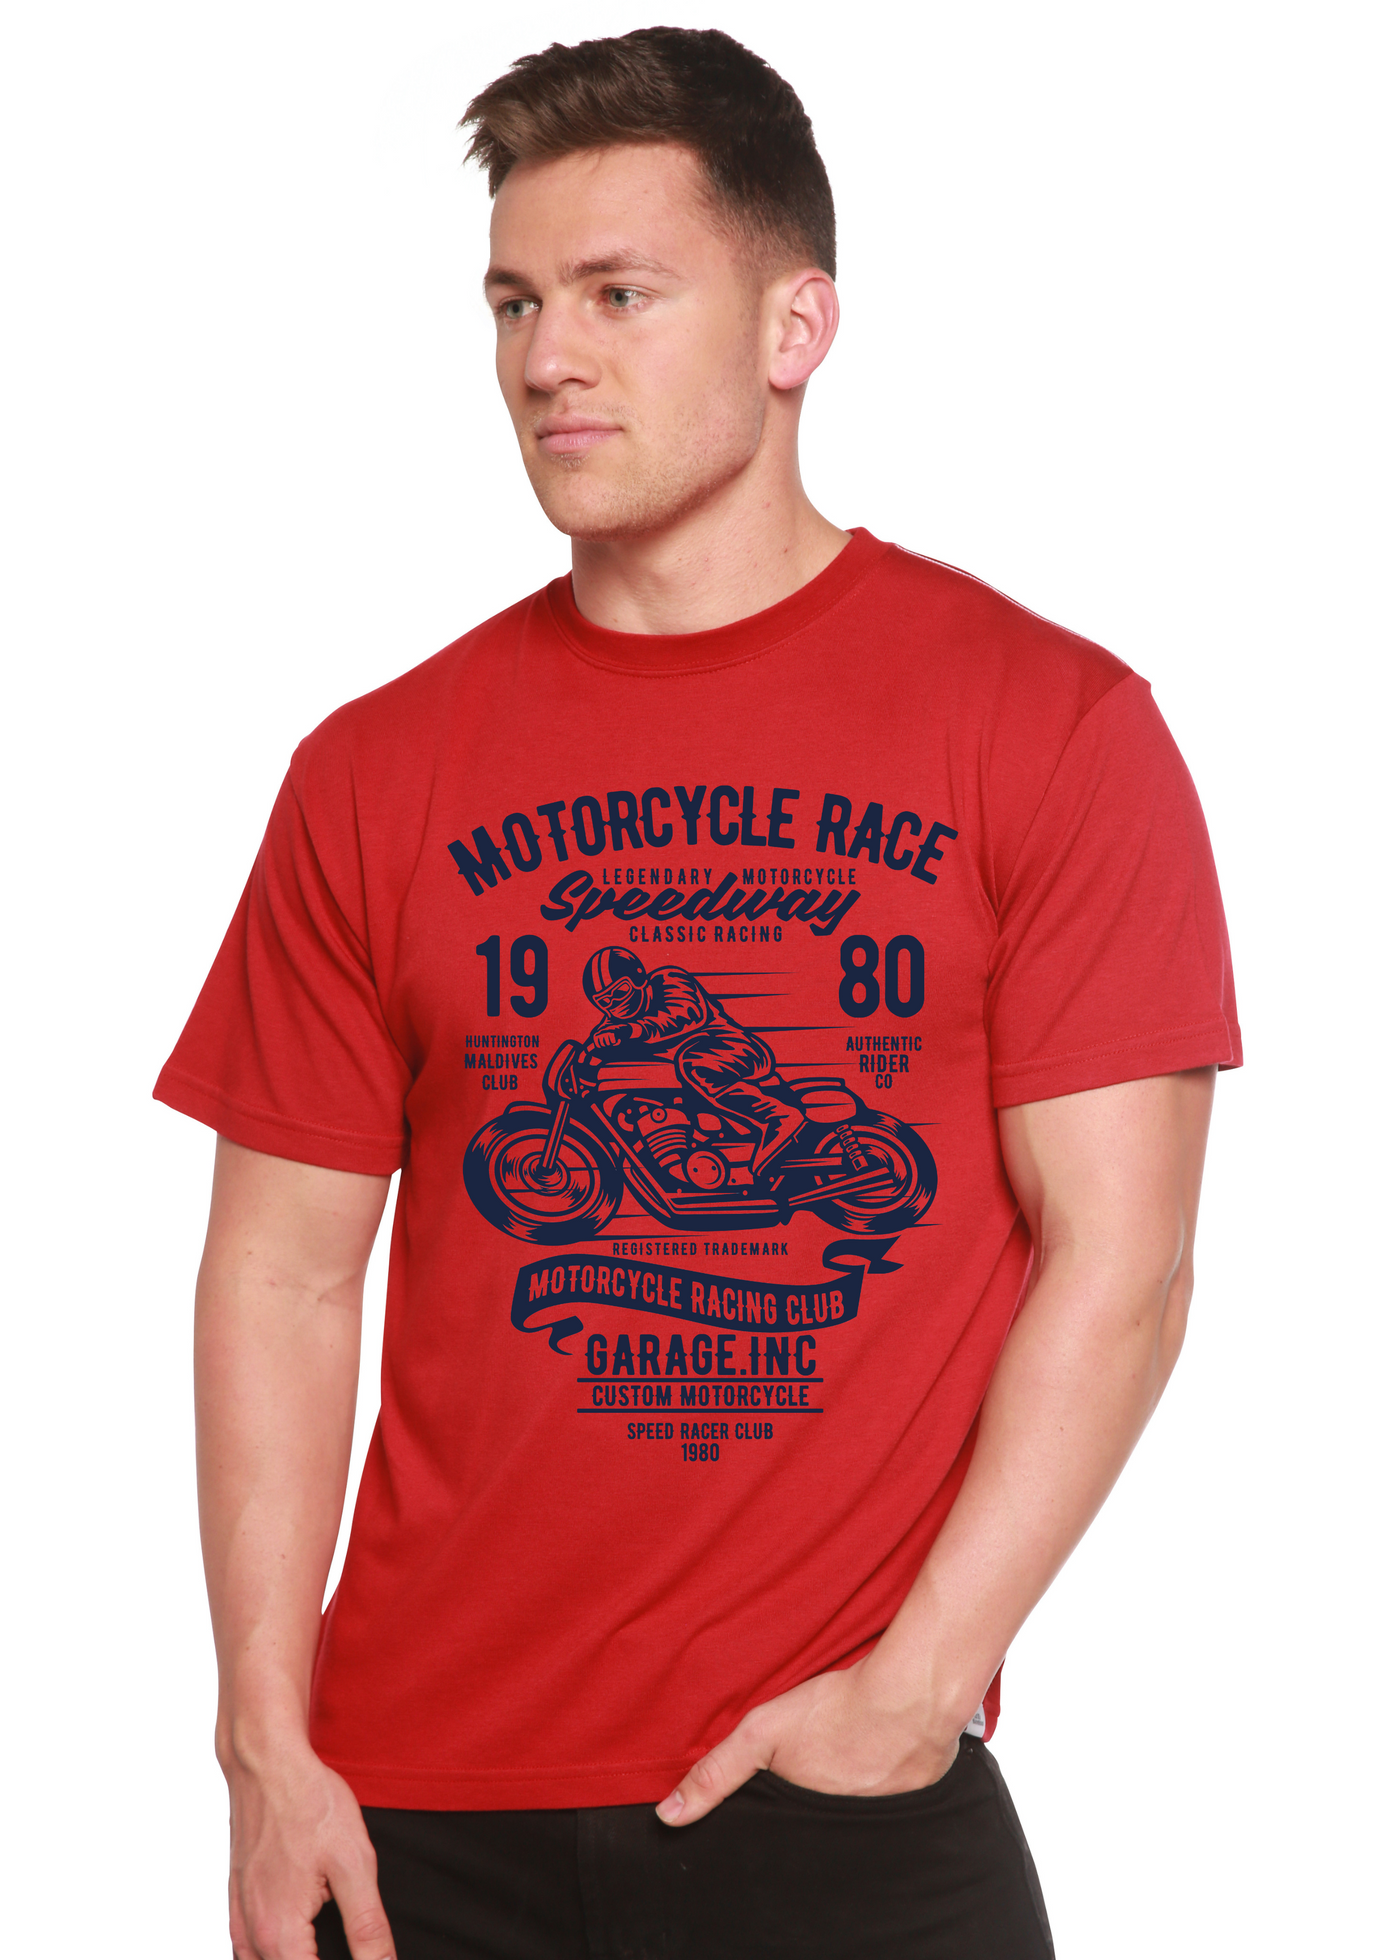 Motorcycles Race men's bamboo tshirt pompeian red